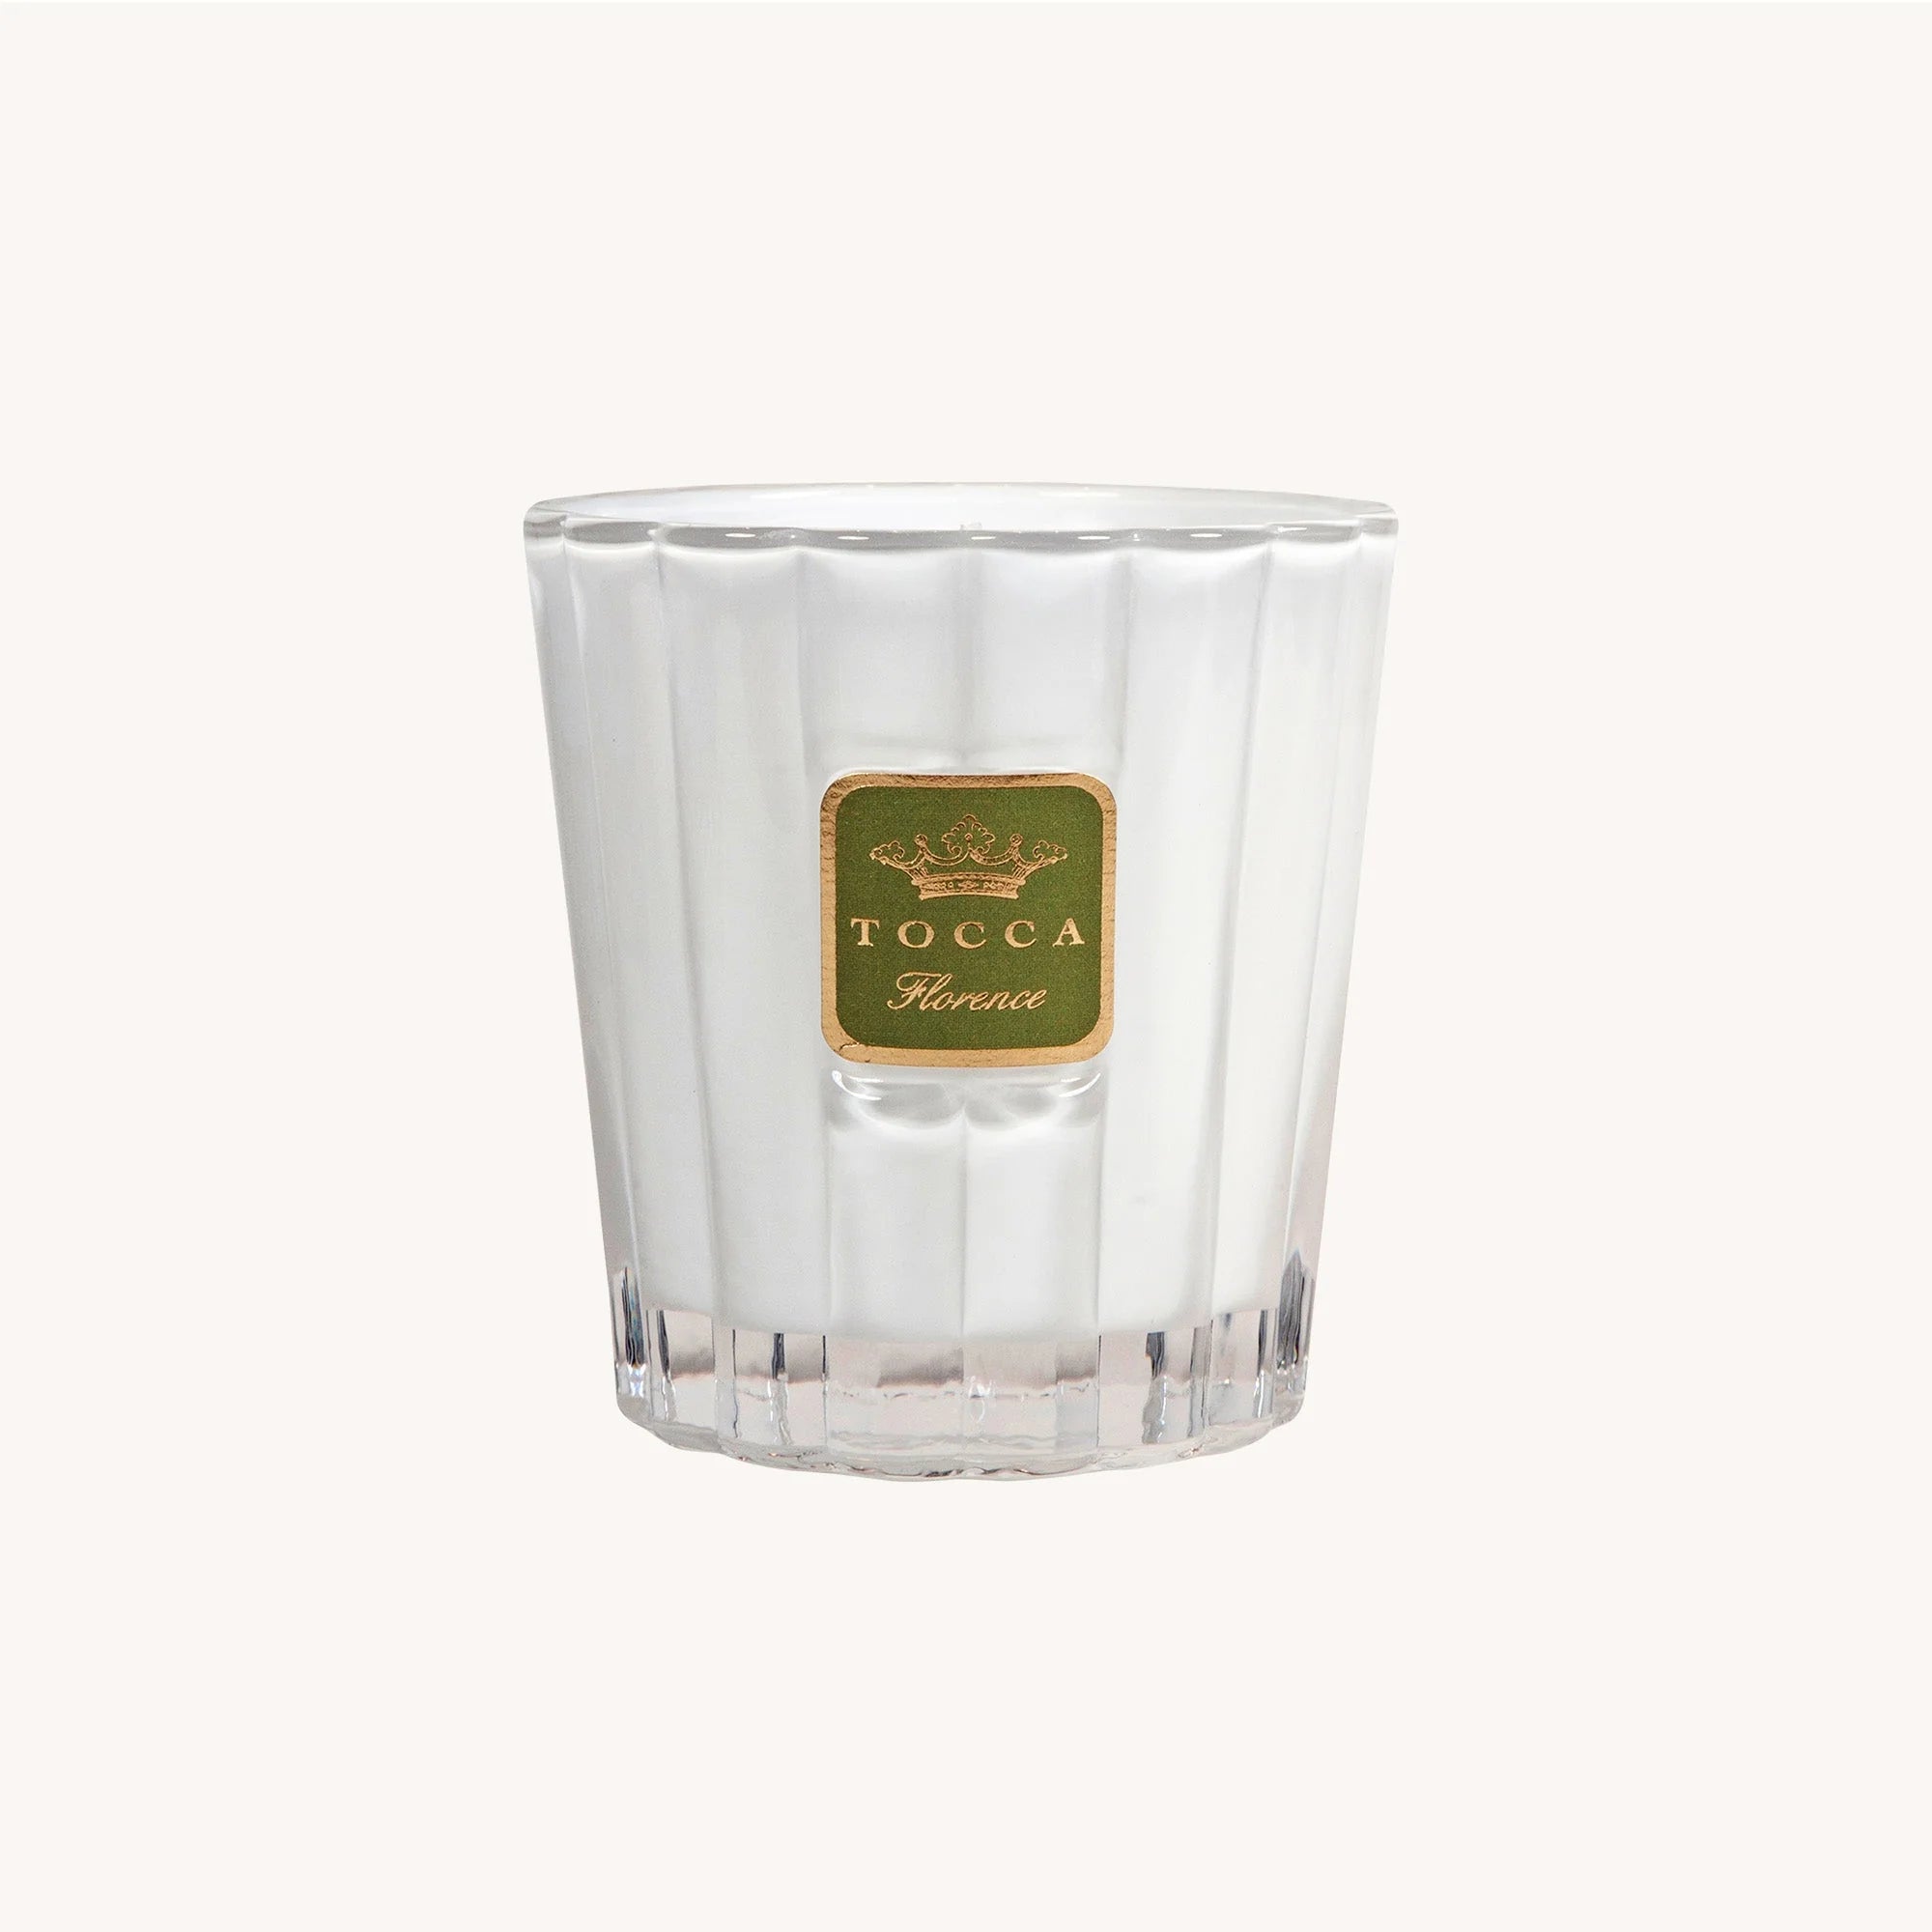 Tocca Candela Florence Scented Candle – 10oz.